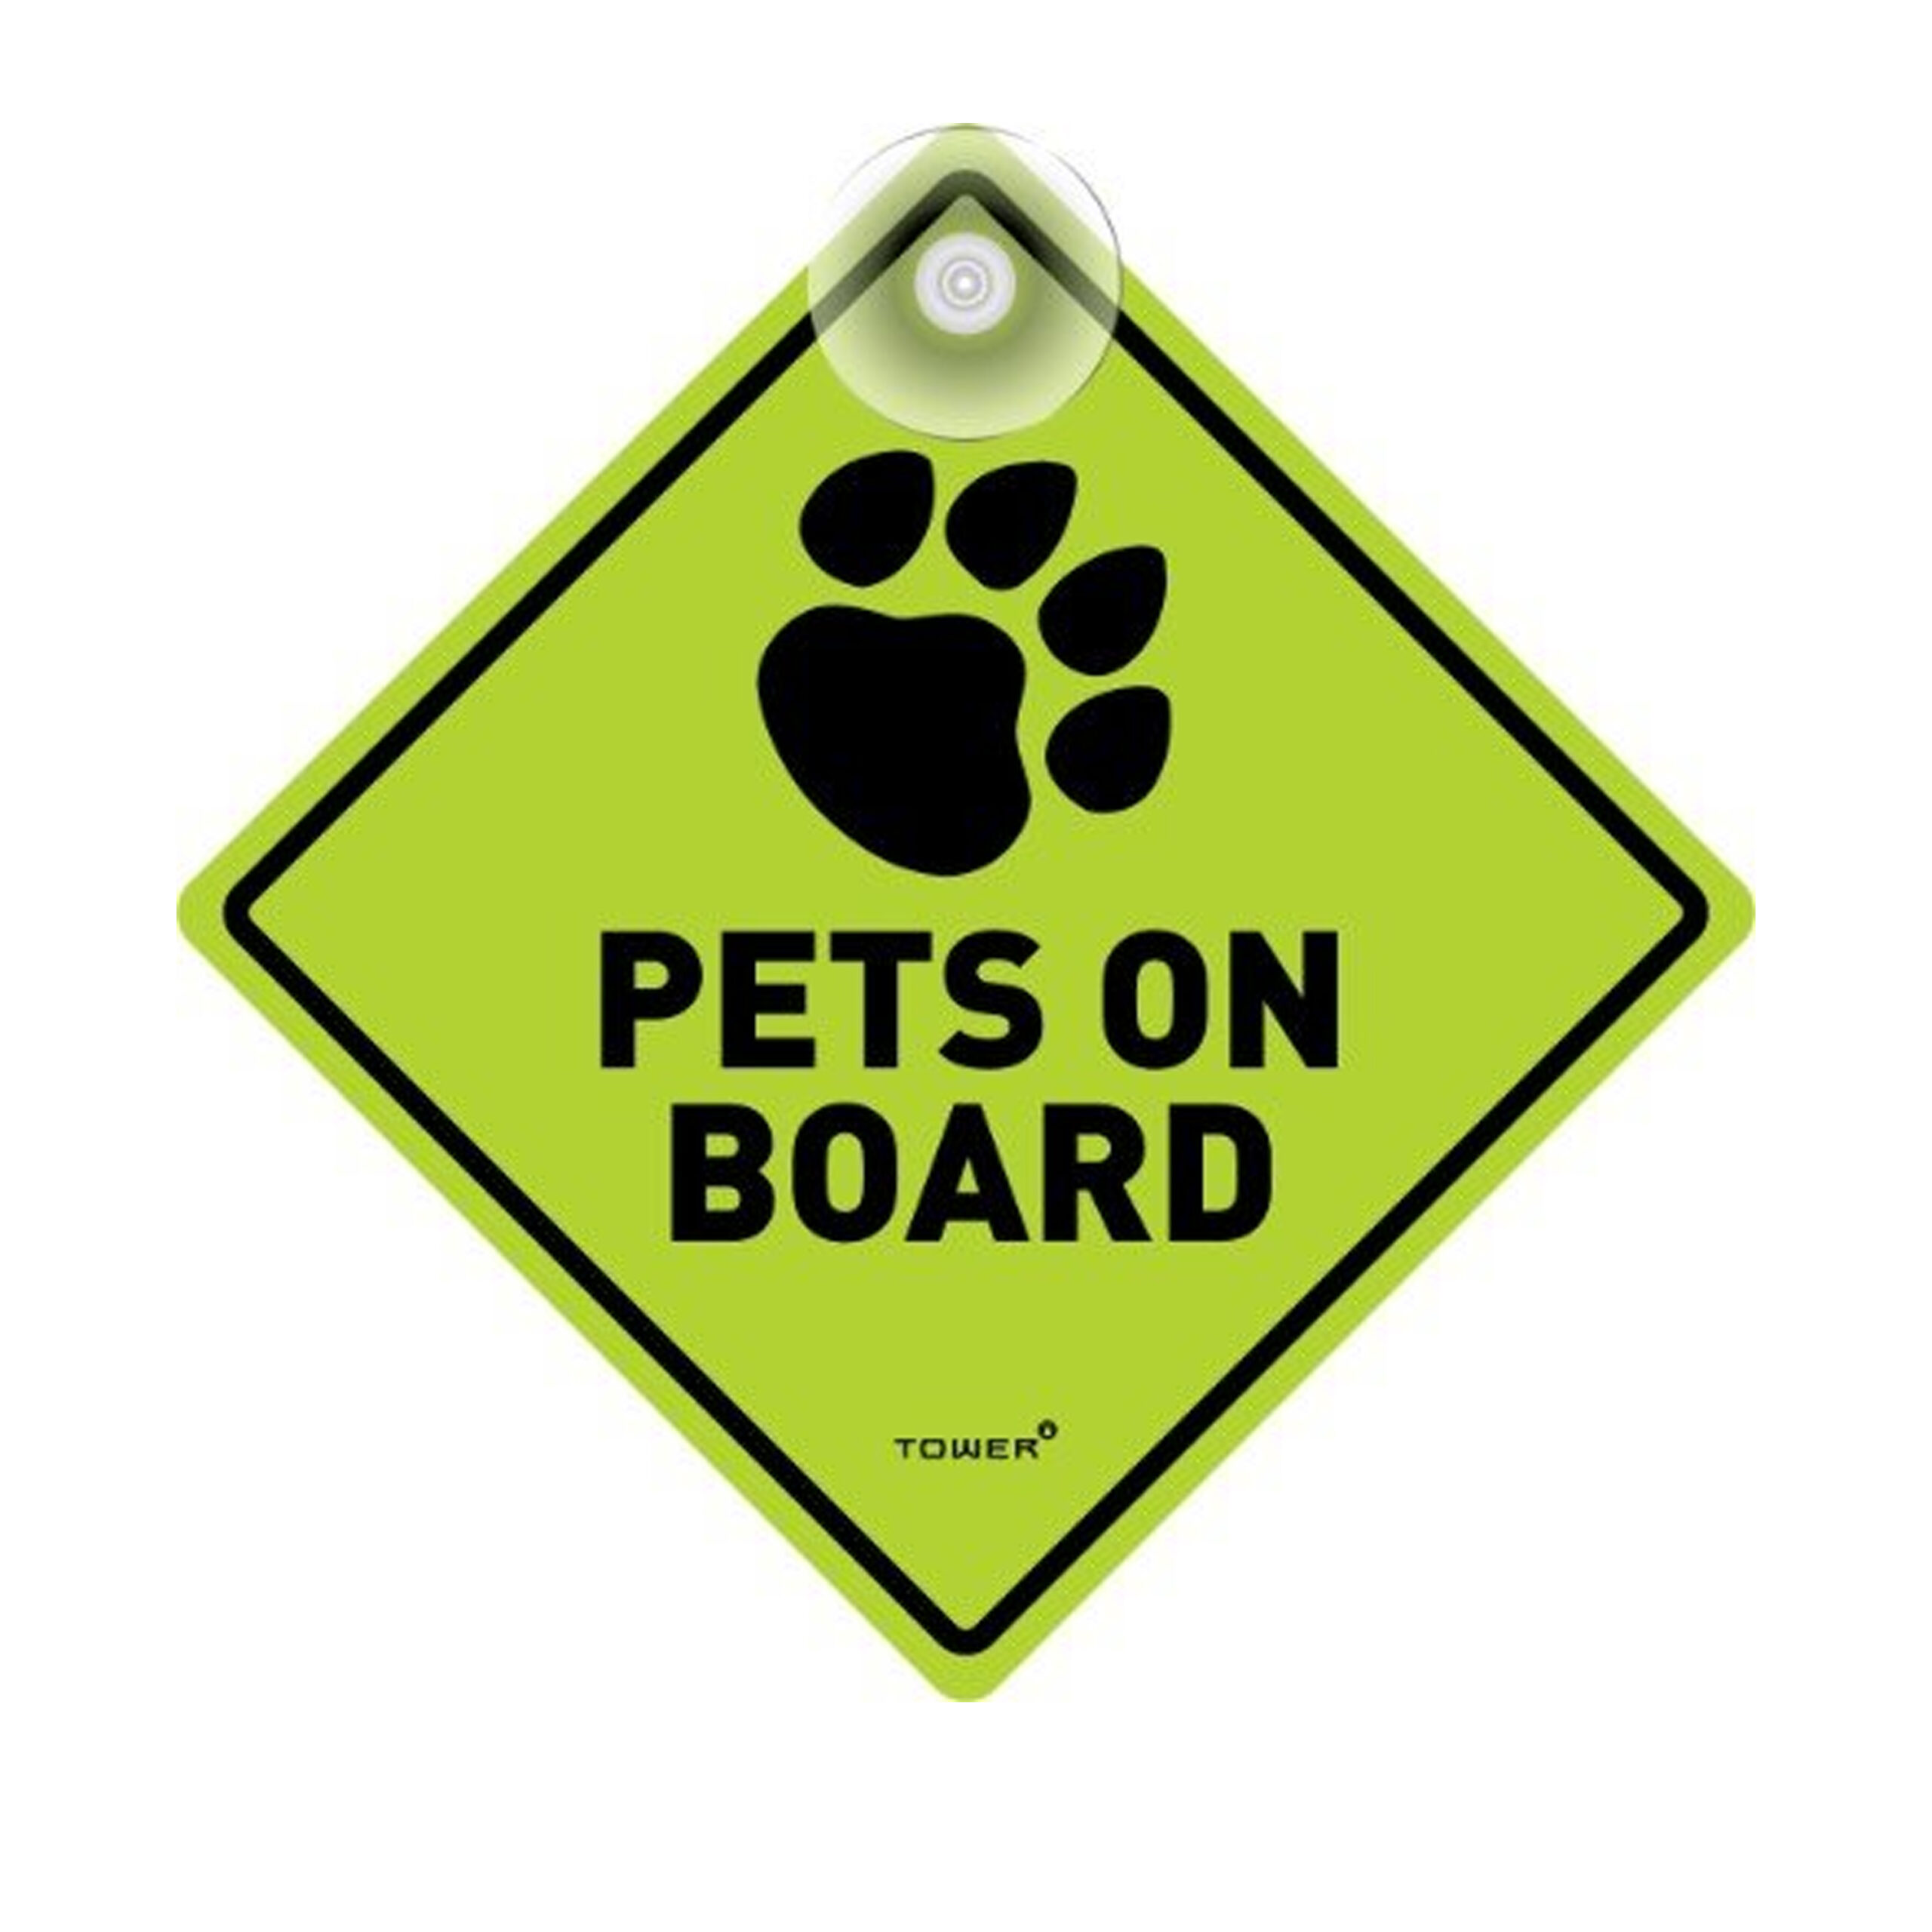 TOWER  VEHICLE
SIGN  "PETS ON
BOARD" 
135x135mm